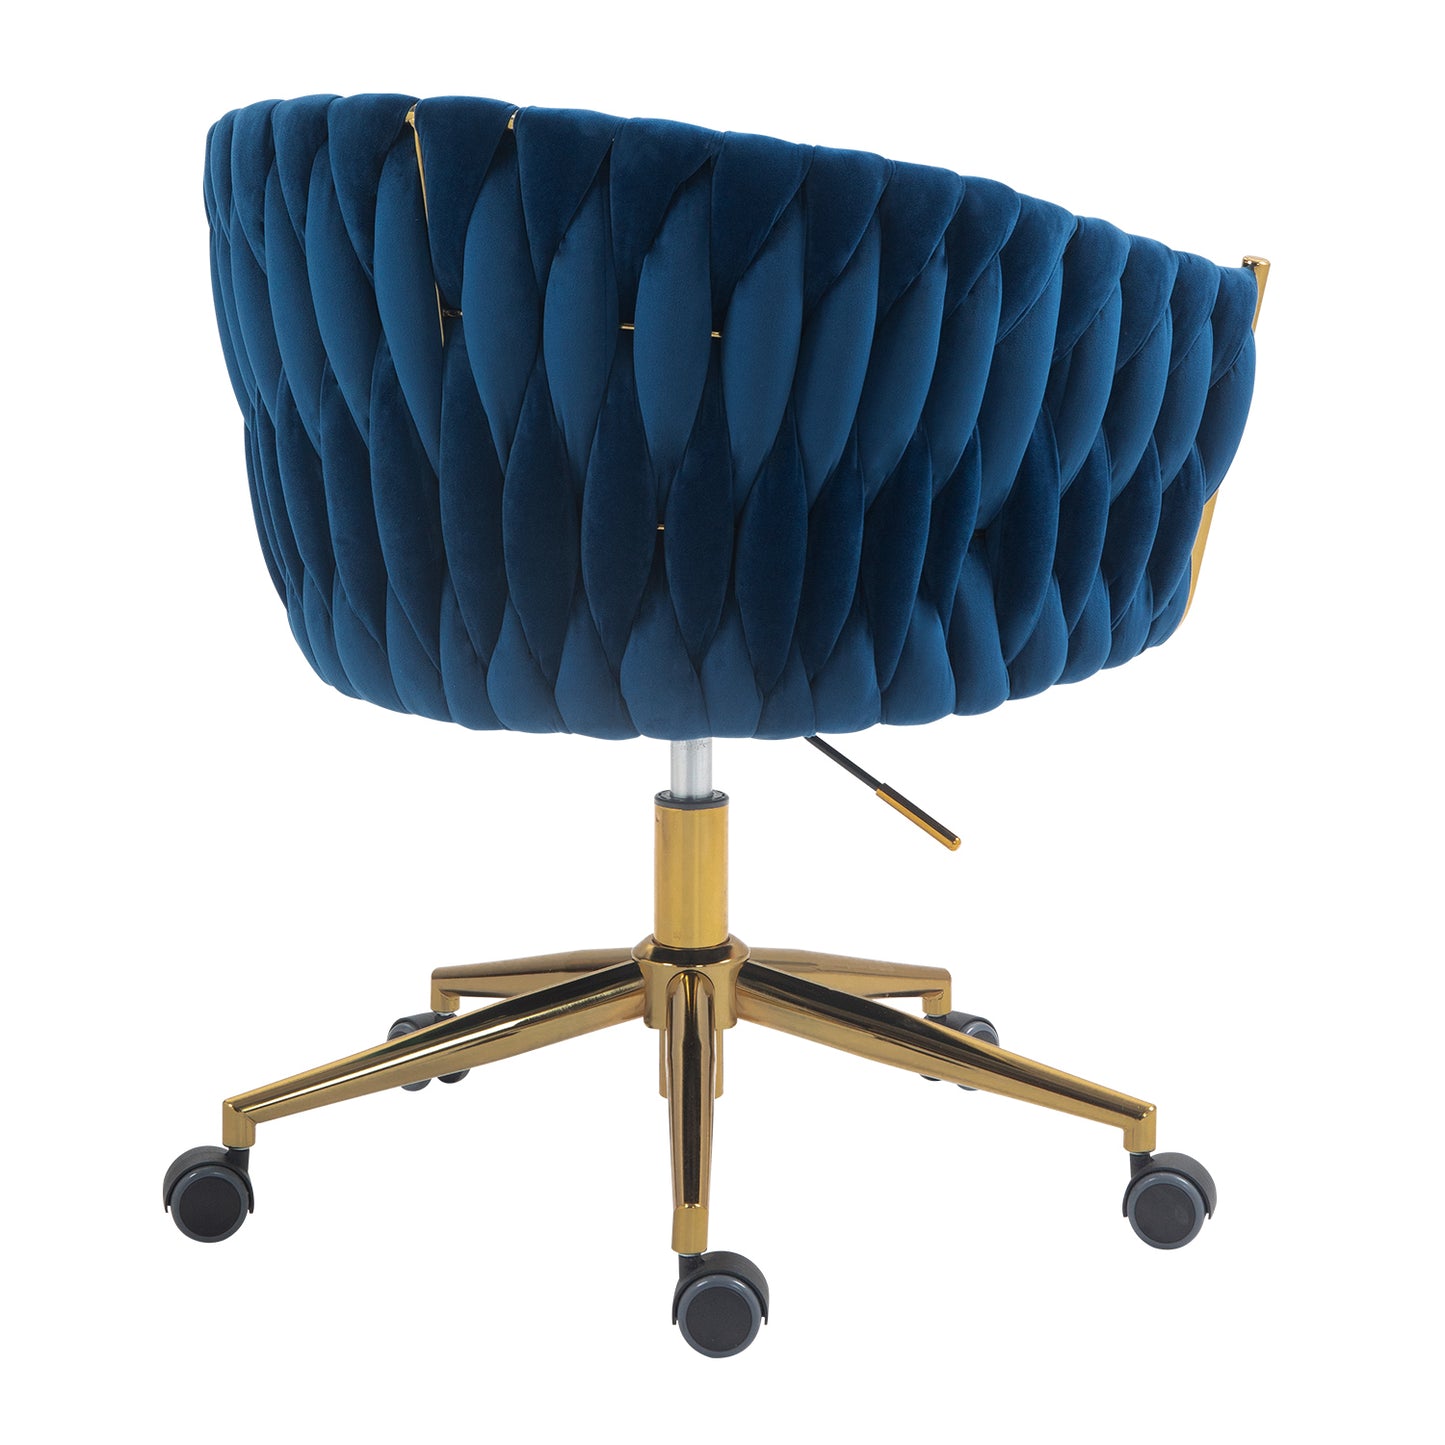 Modern design the backrest is hand made woven Office chair,Vanity chairs with wheels,Height adjustable,360° swivel for bedroom, living room(BLUE)